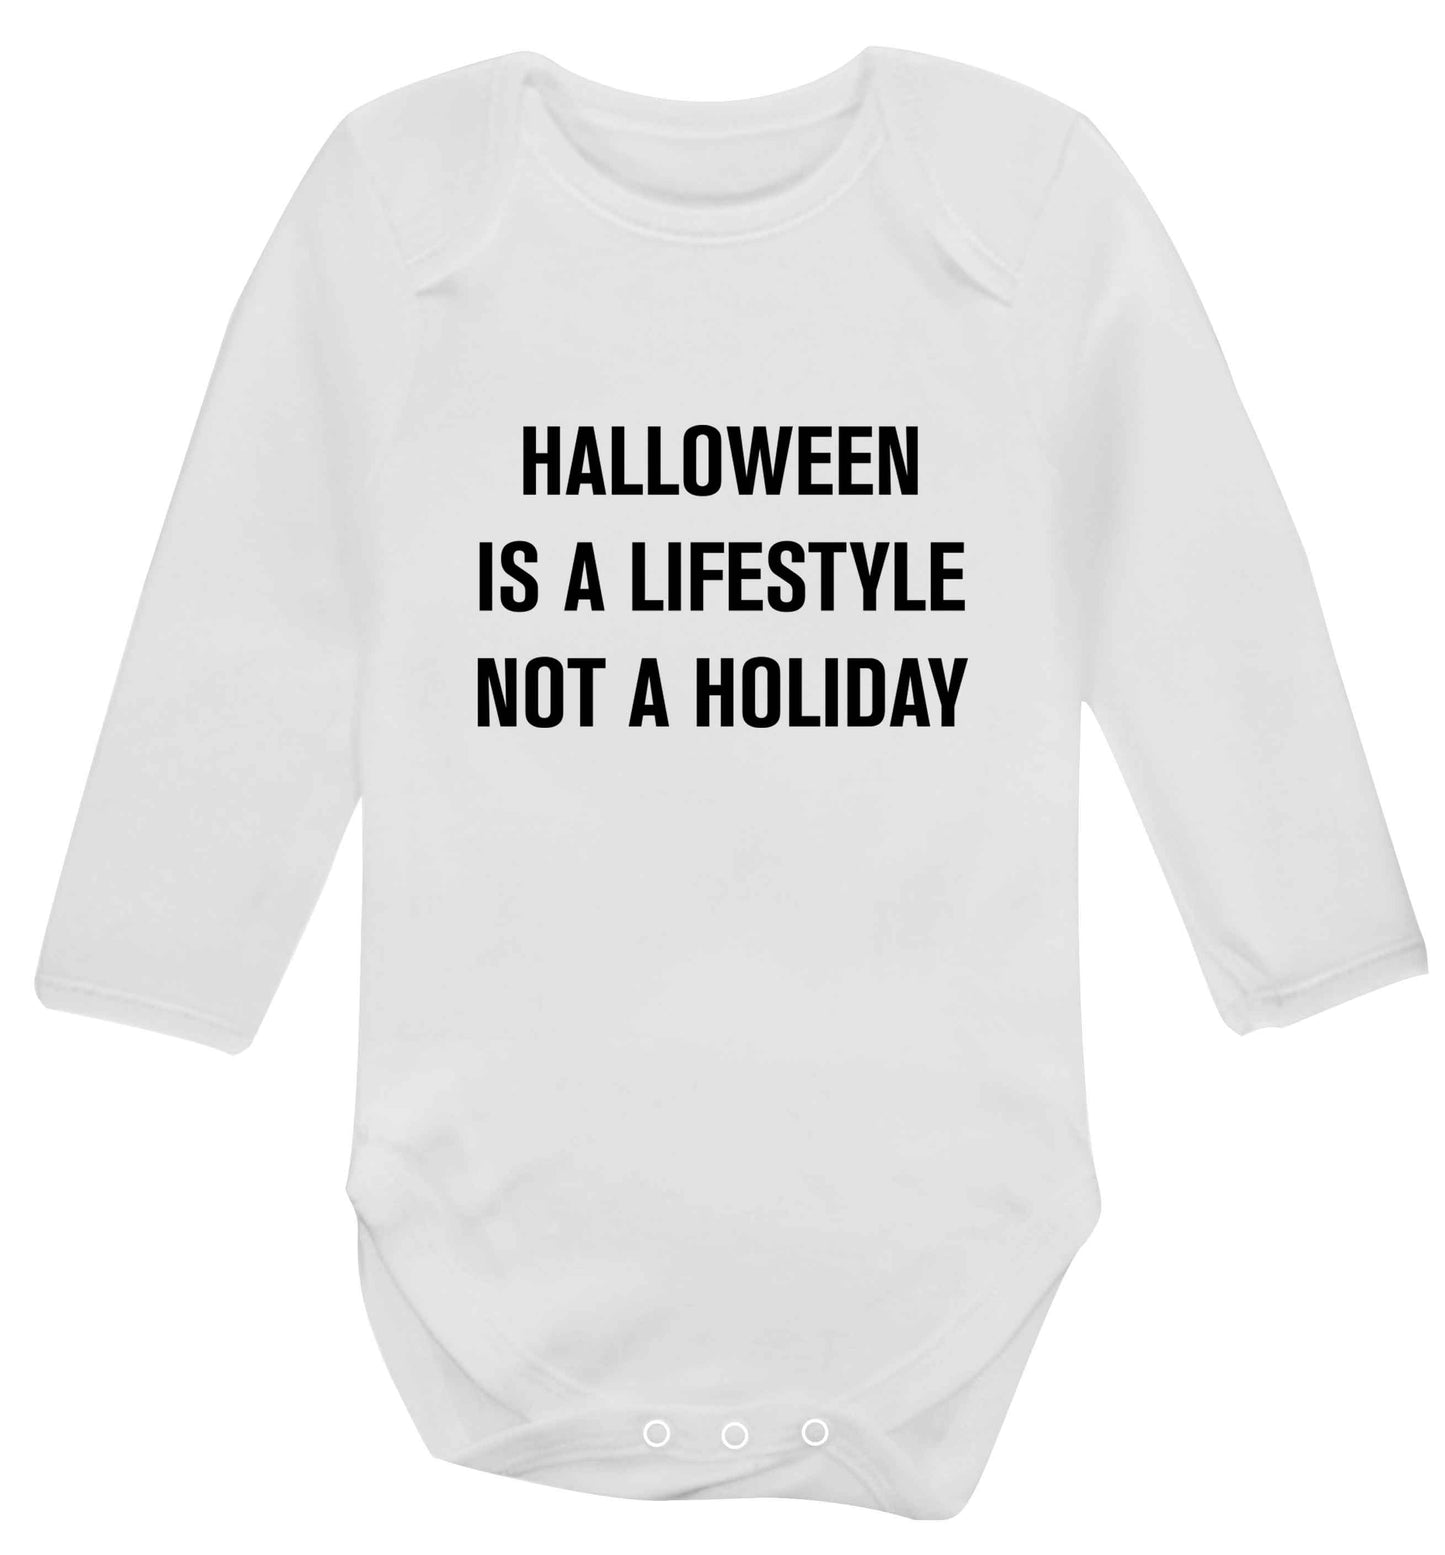 Halloween is a lifestyle not a holiday baby vest long sleeved white 6-12 months